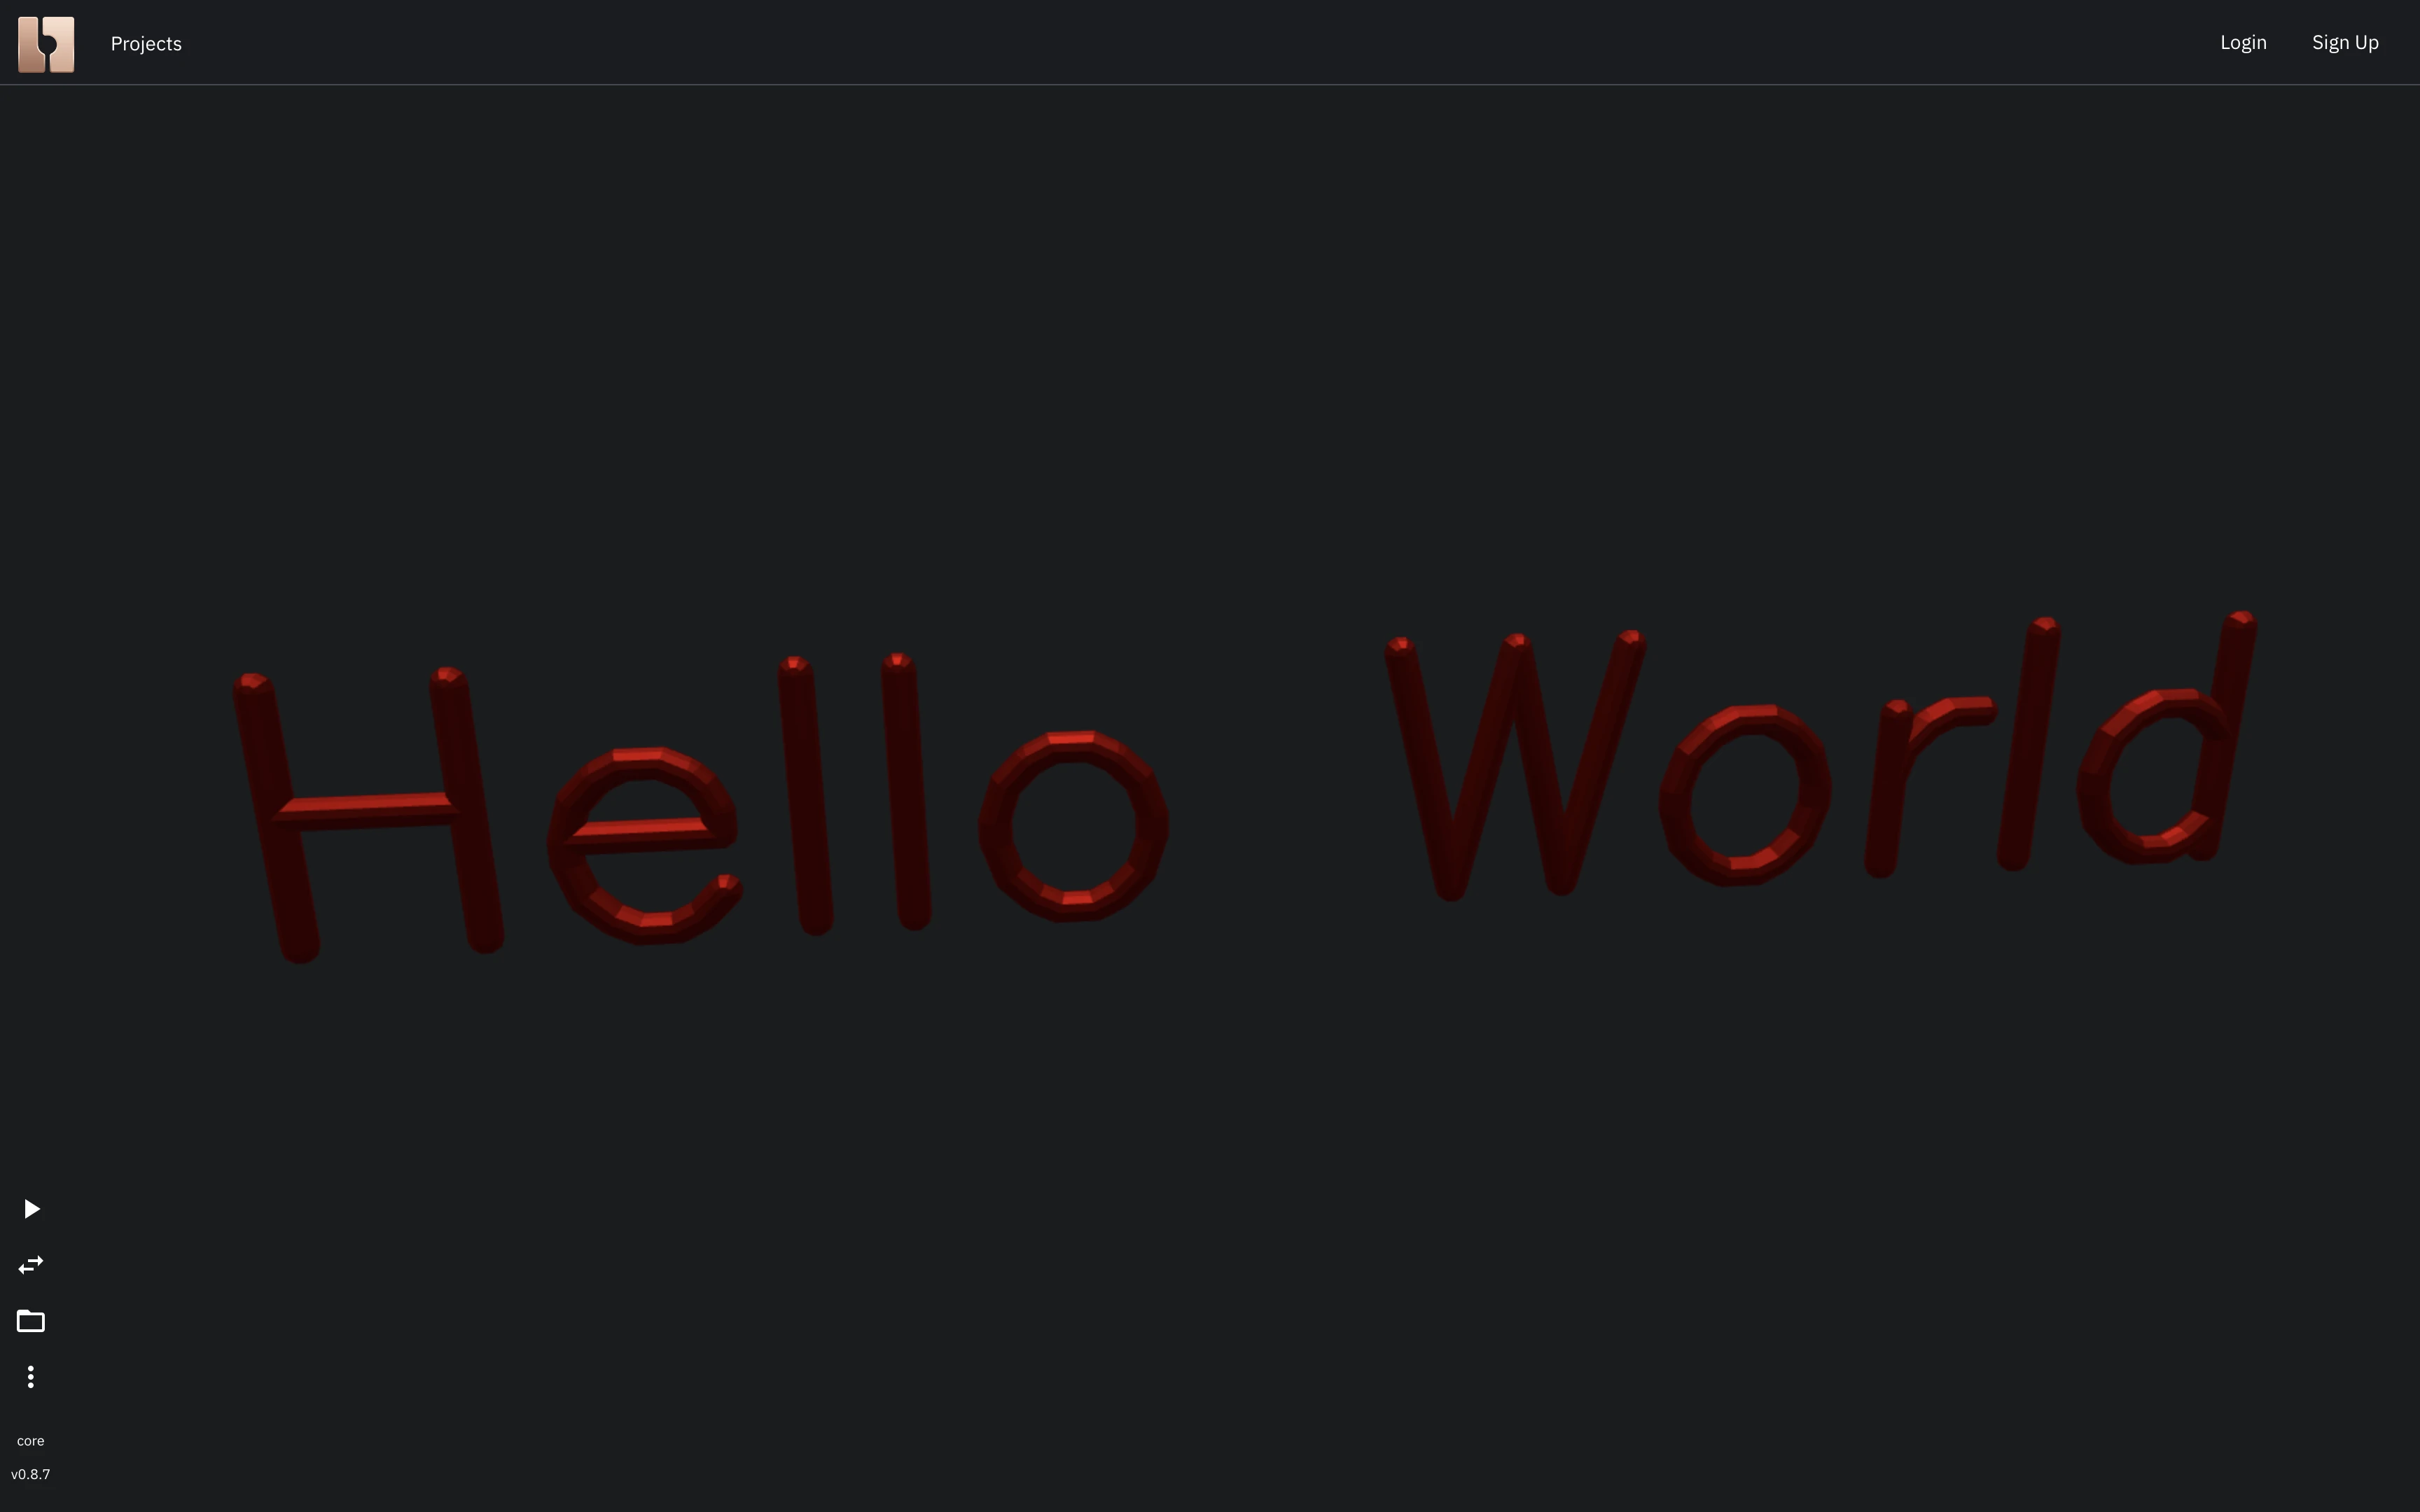 Image shows the result of script execution that creates 3D hello world text